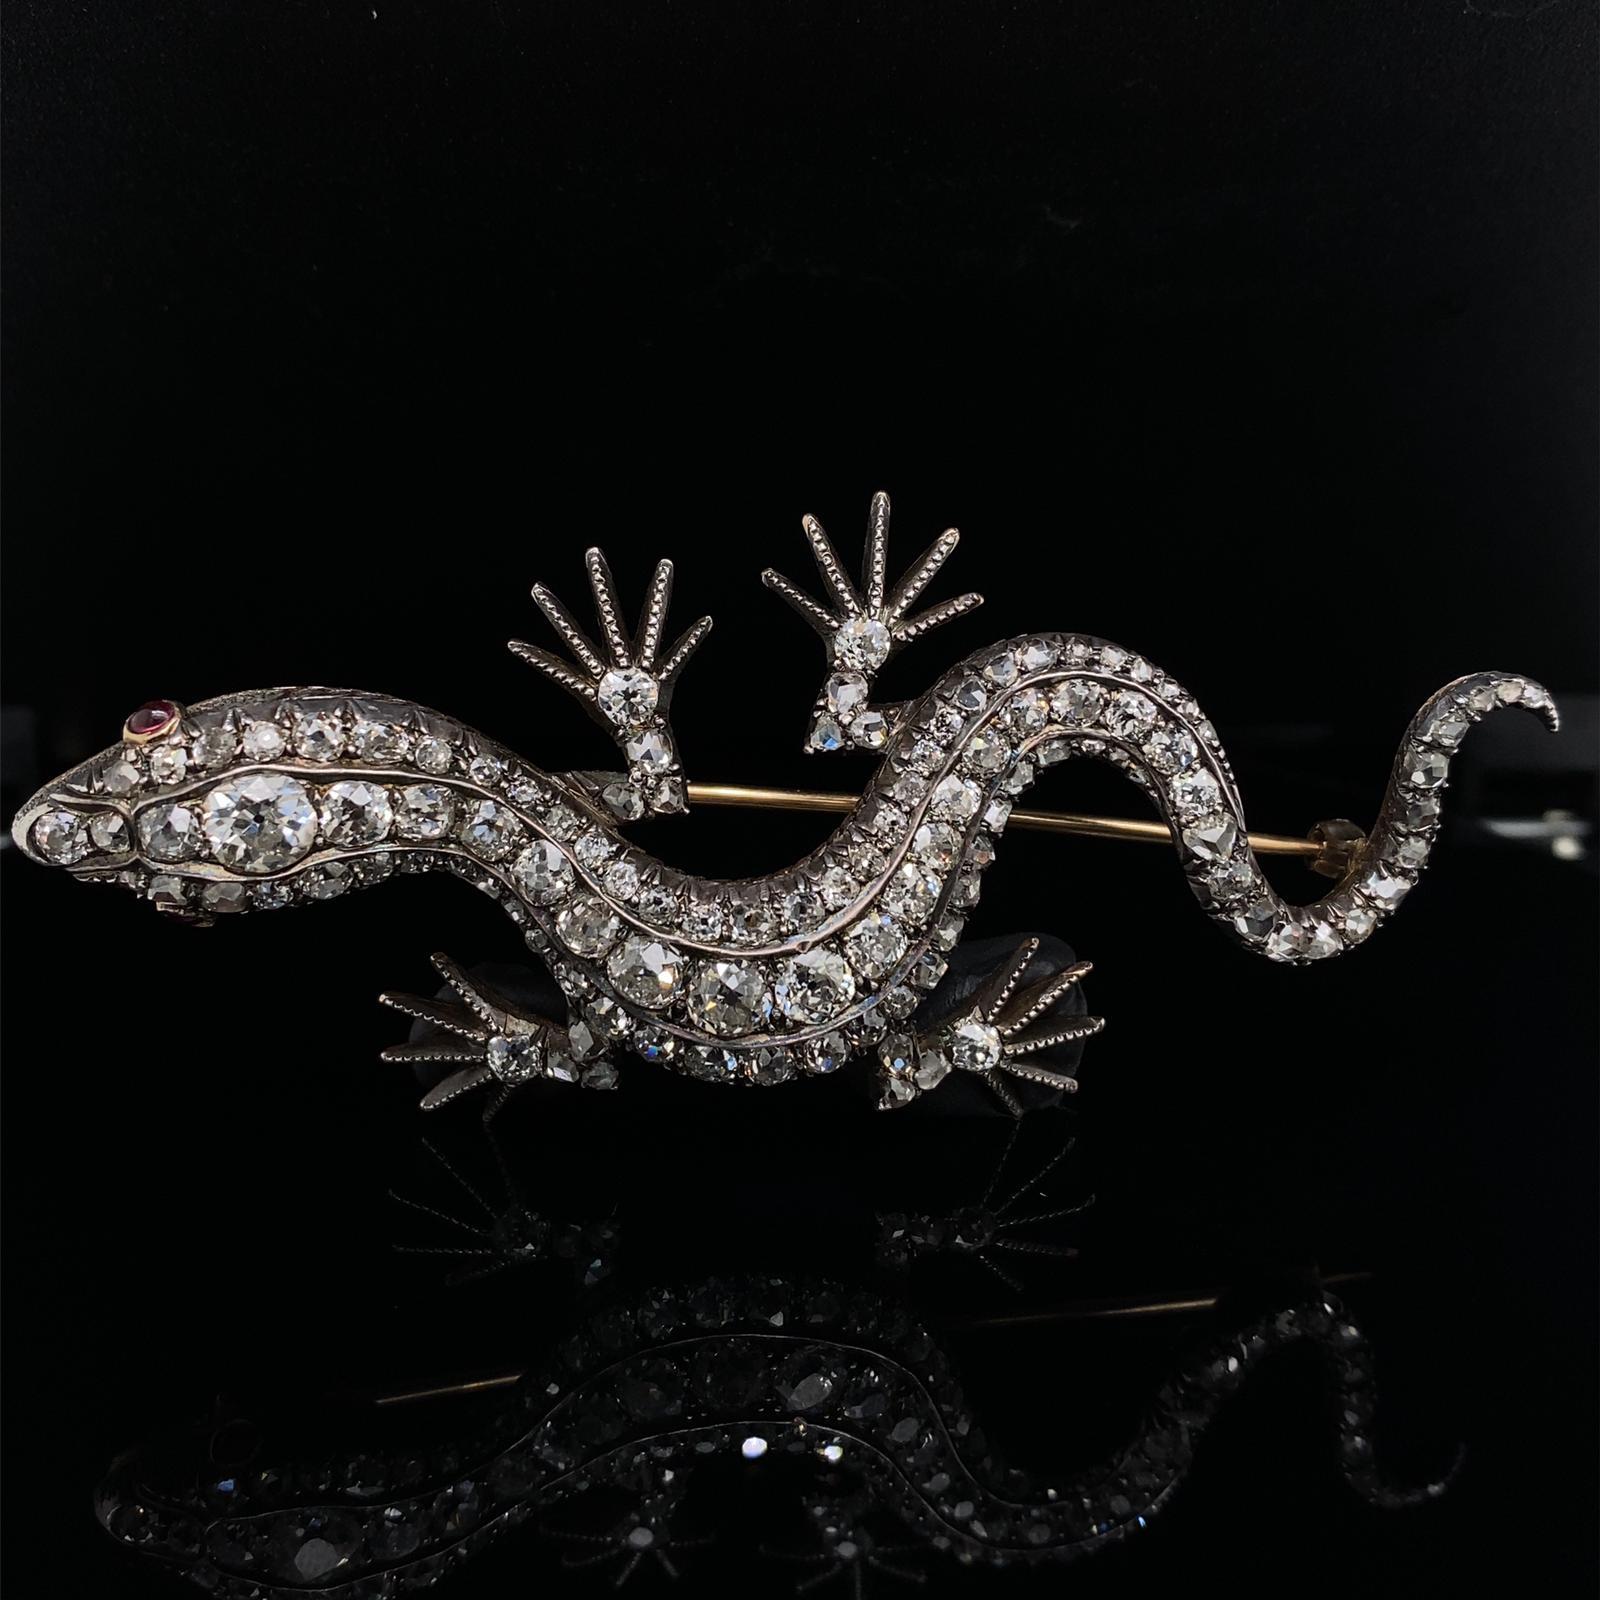 A Victorian diamond set lizard brooch in silver and yellow gold

This late 19th Century brooch, takes the elegant form of a lizard in motion, set throughout with old European and rose-cut diamonds with the largest to the head and central section of